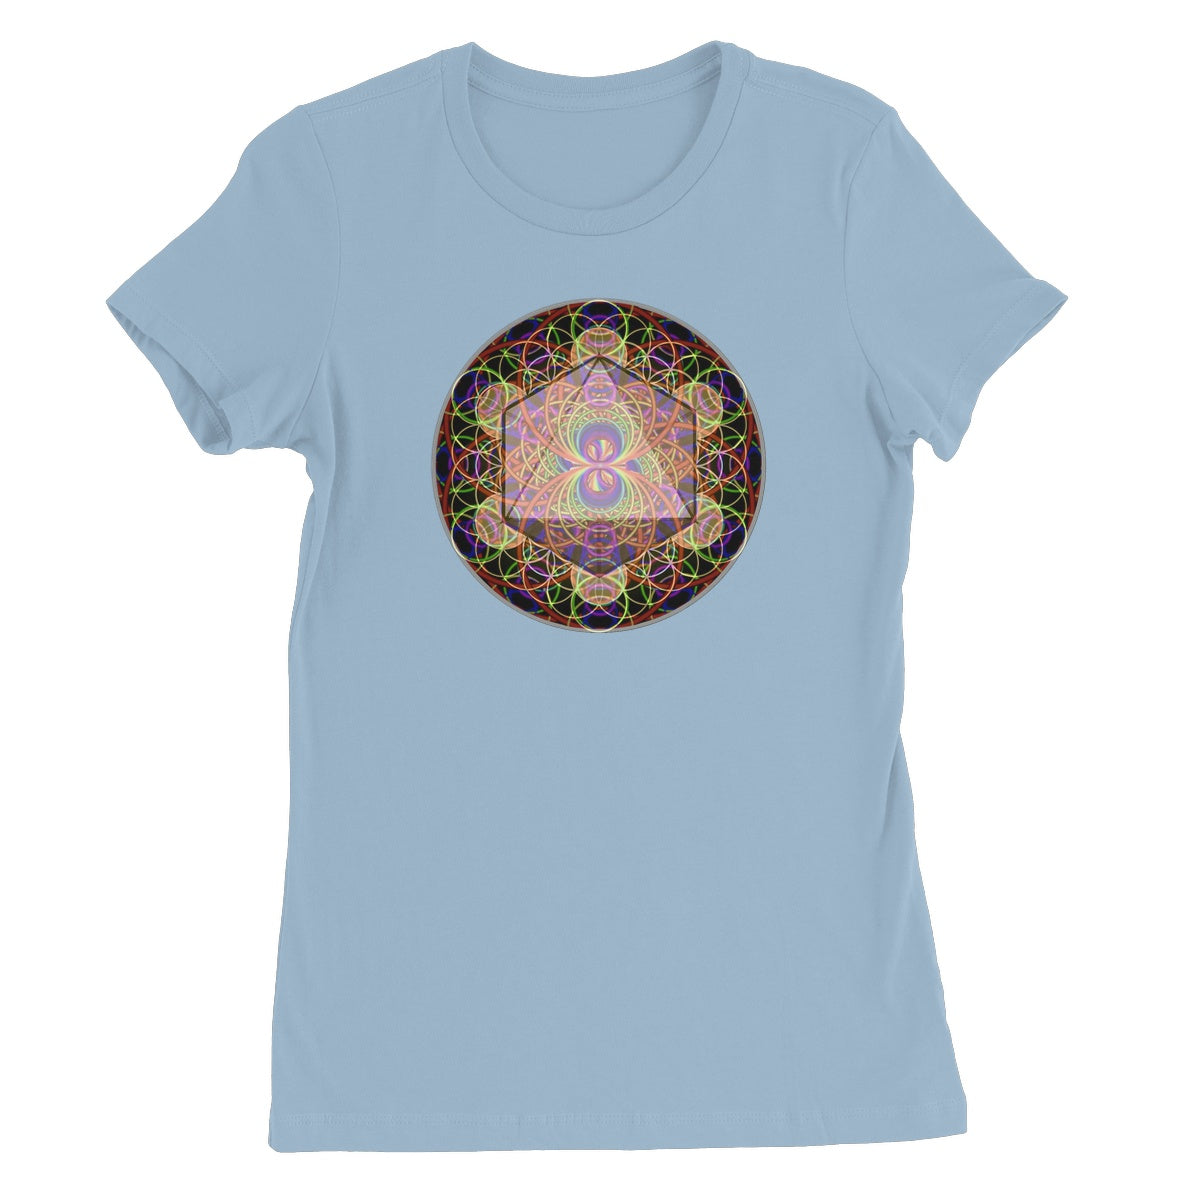 The Platonic Solid Octahedron Women's Favourite T-Shirt